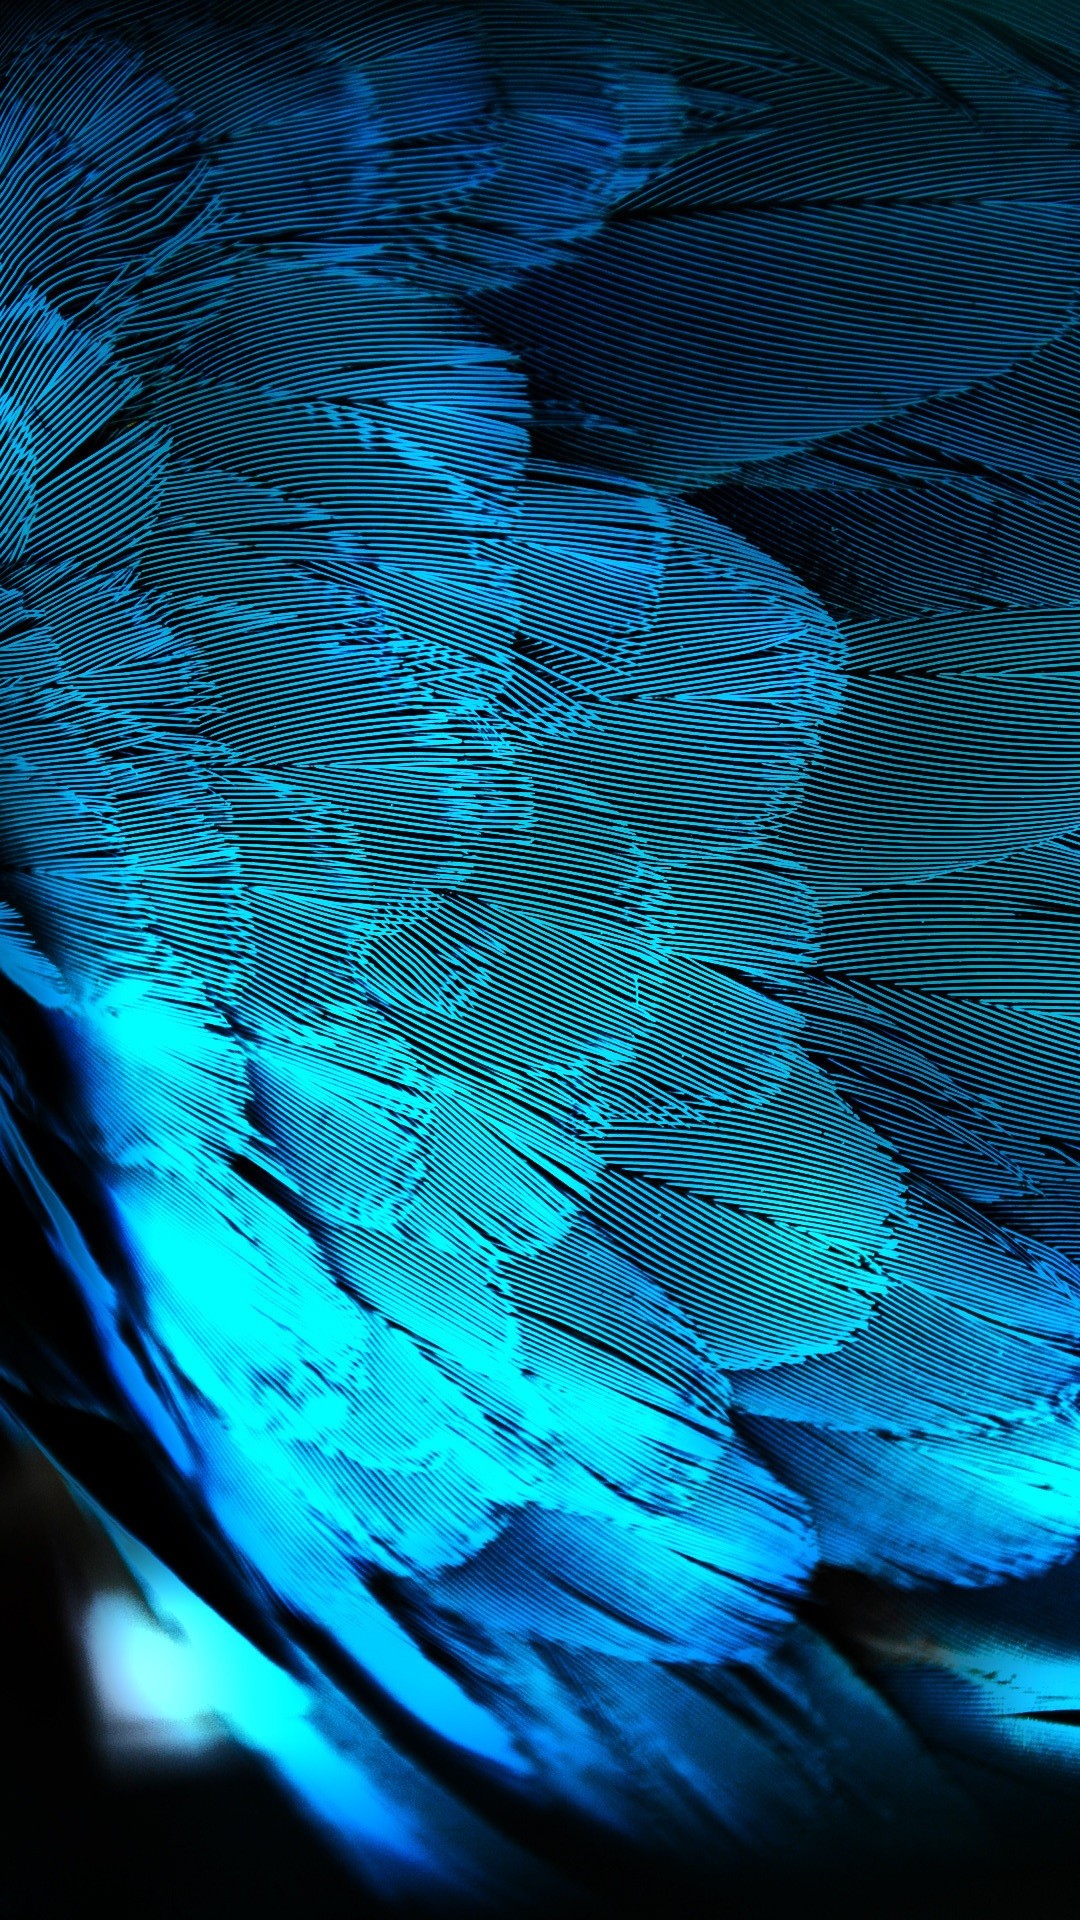 1080x1920 Blue HD Peacock Feathers Android Wallpaper ...